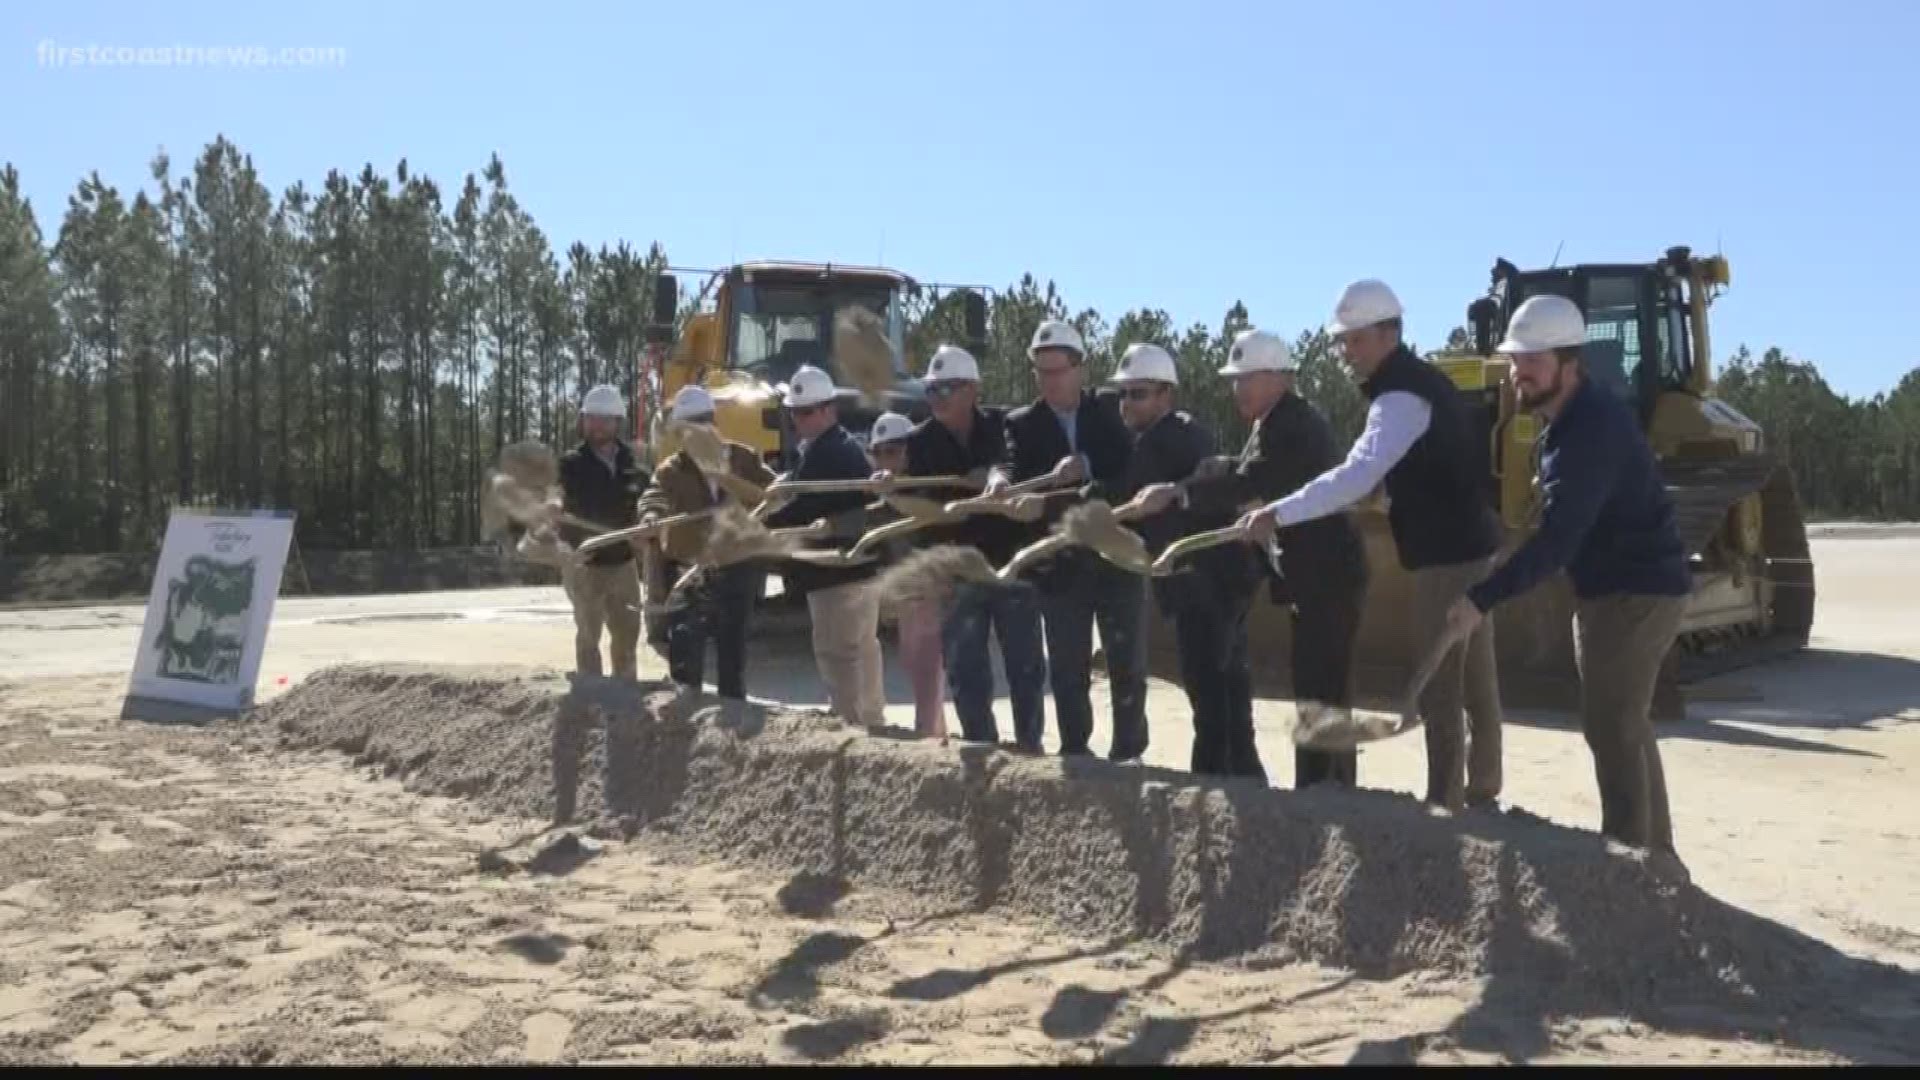 The 1,500-acre community, called Tributary, will be located near A1A and Edwards Road just west of I-95 and will contain around 3,200 homes.